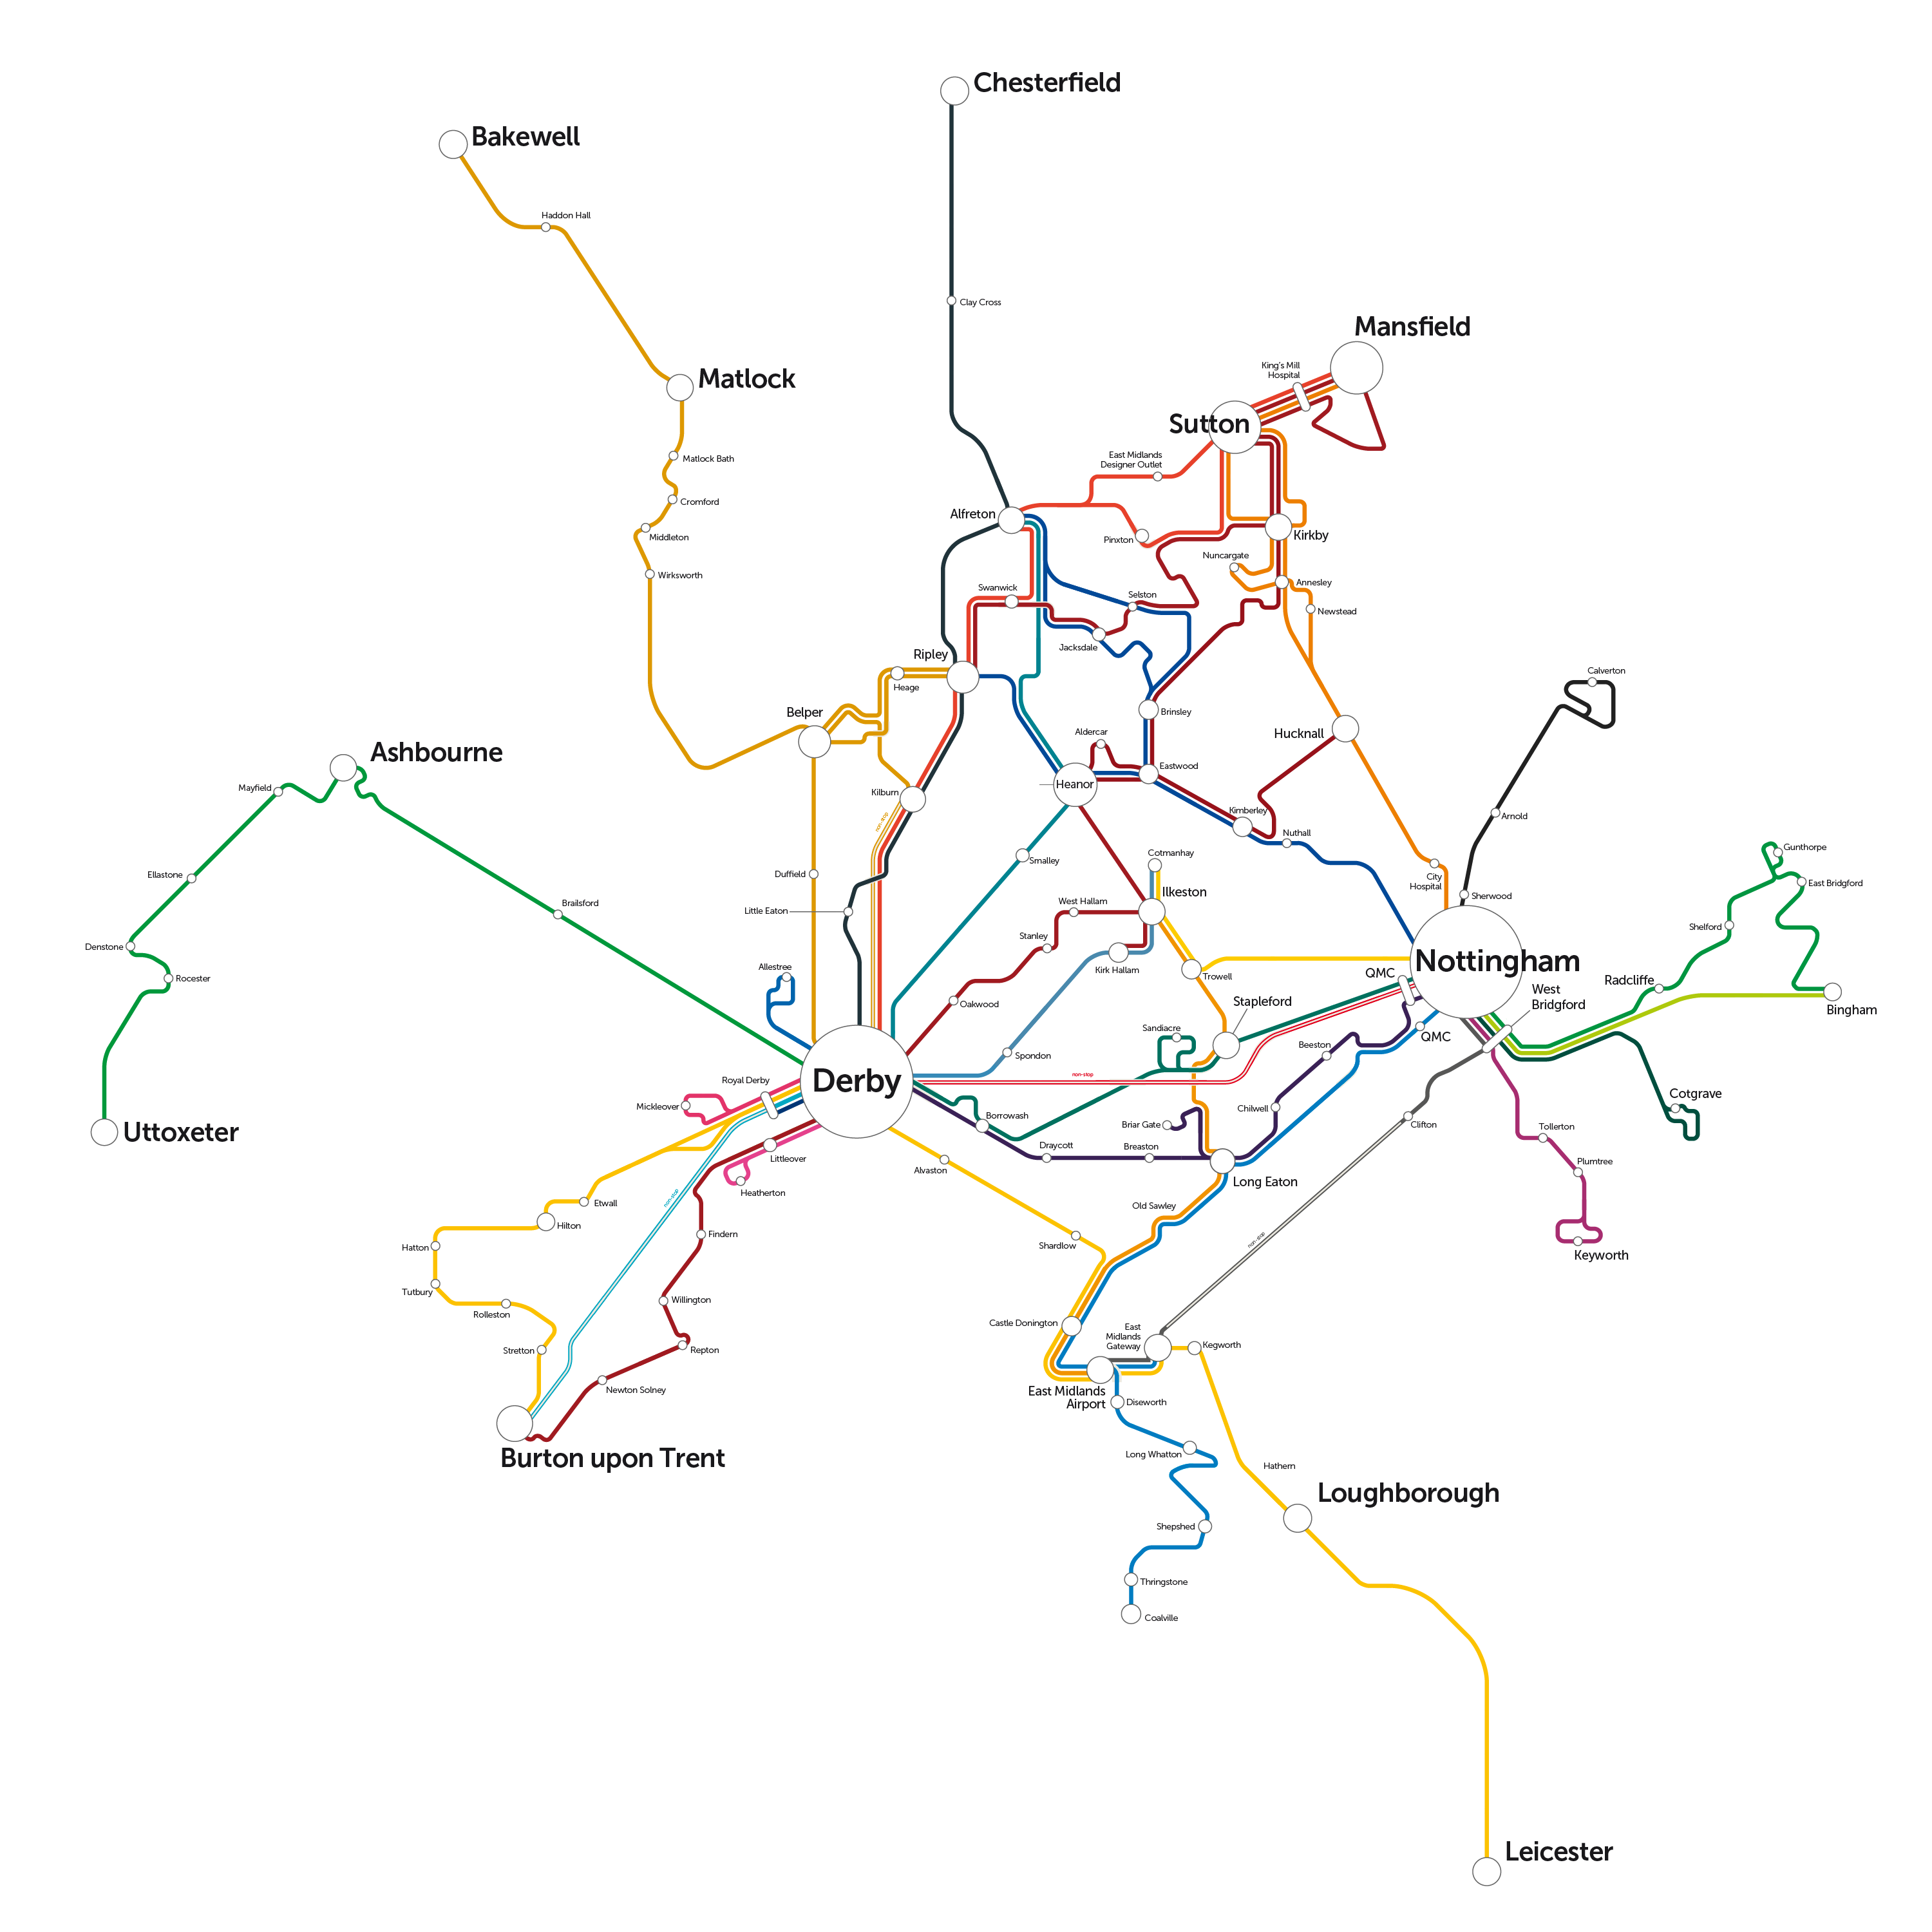 network map